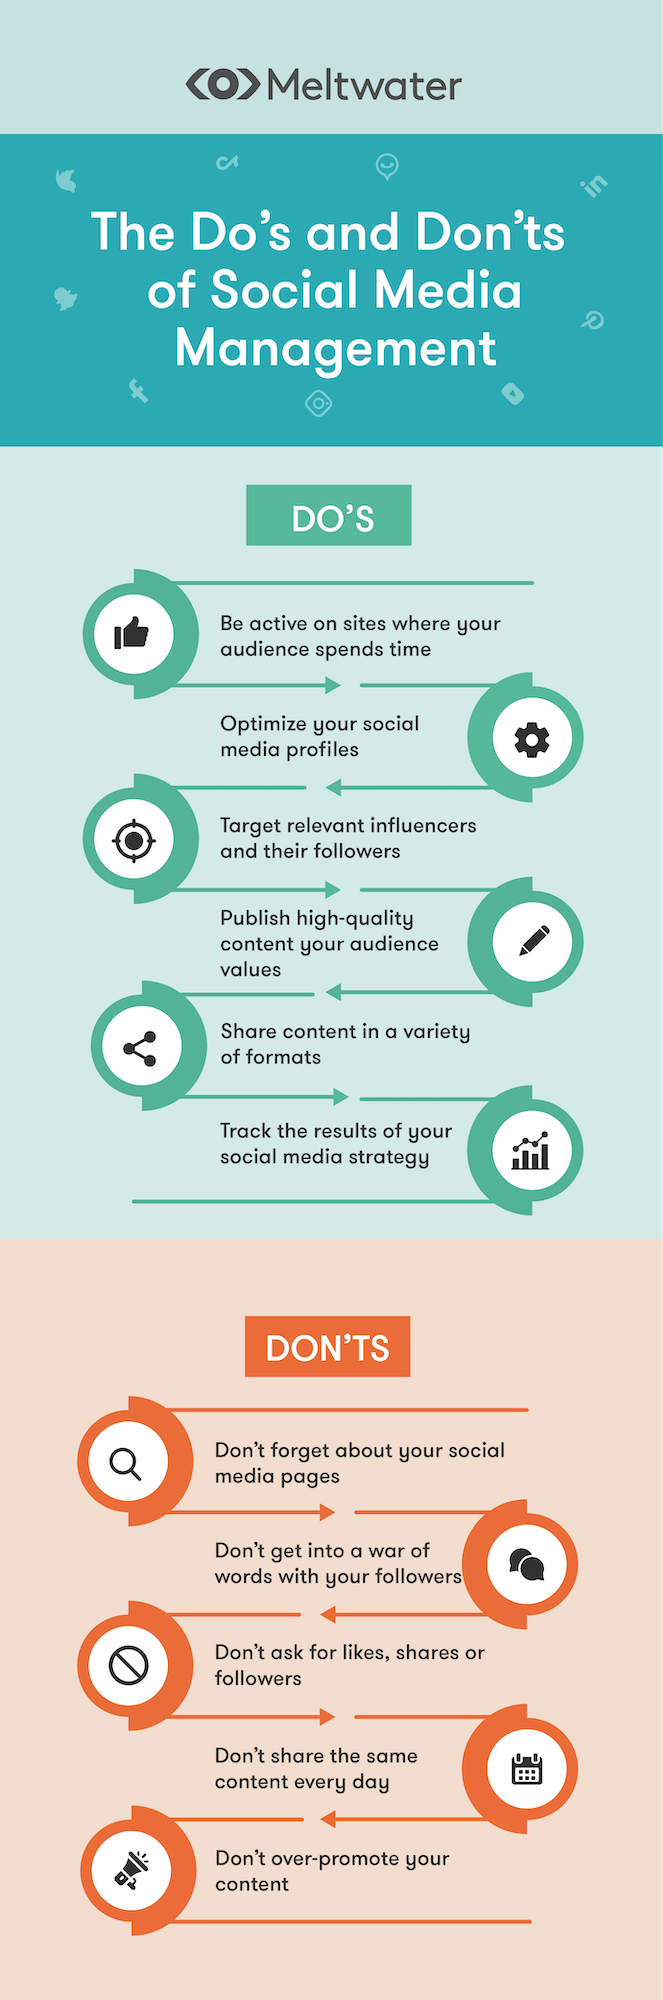 Infographic displaying the Do's and Don'ts of social media management